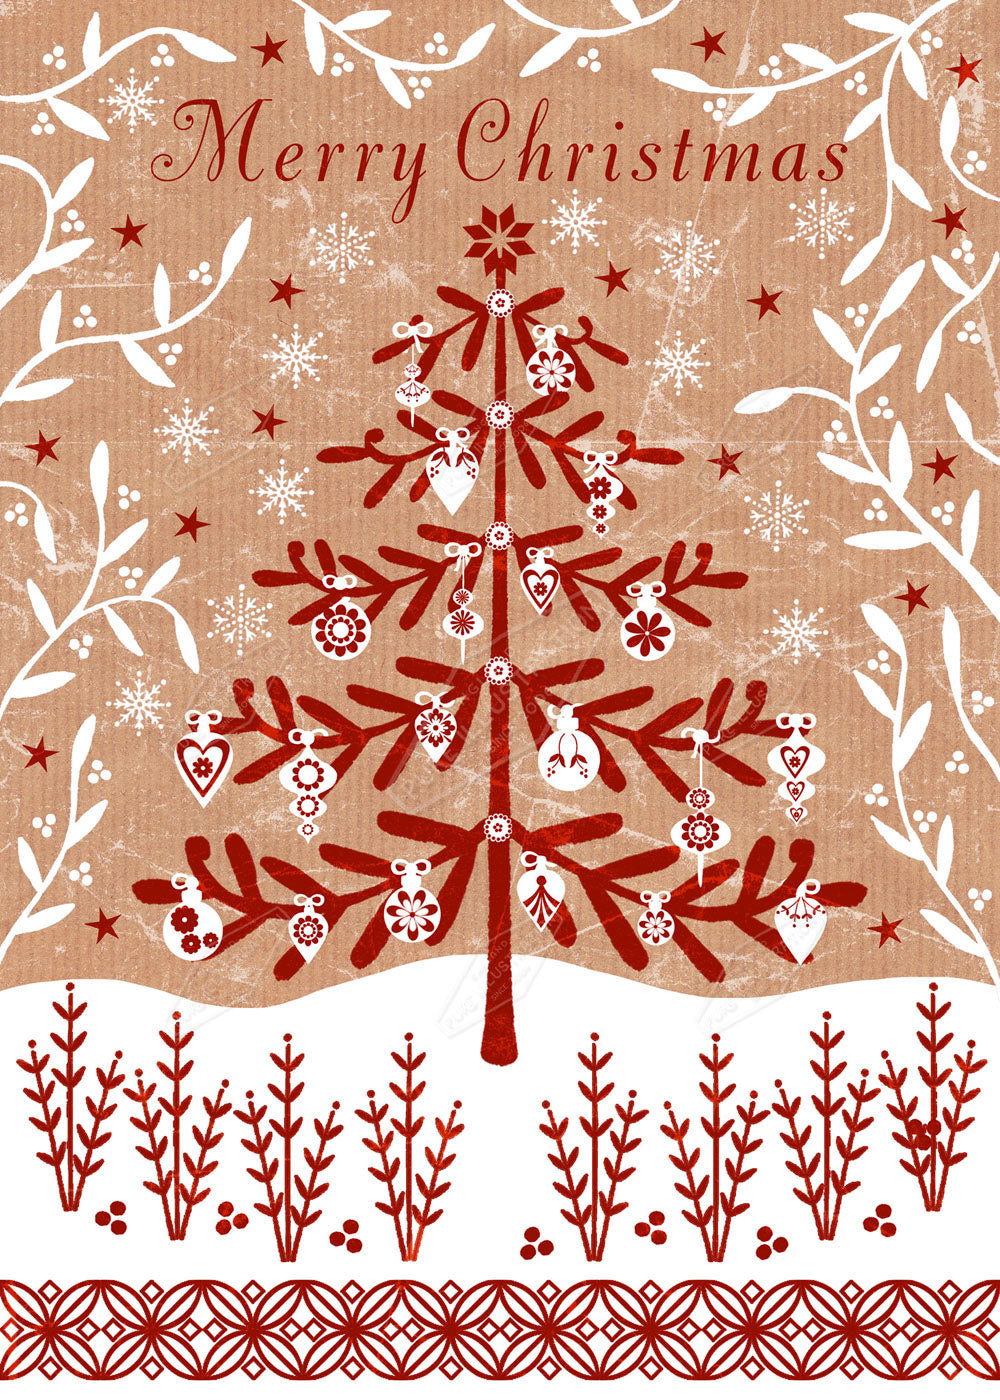 00021883SSN- Sian Summerhayes is represented by Pure Art Licensing Agency - Christmas Greeting Card Design